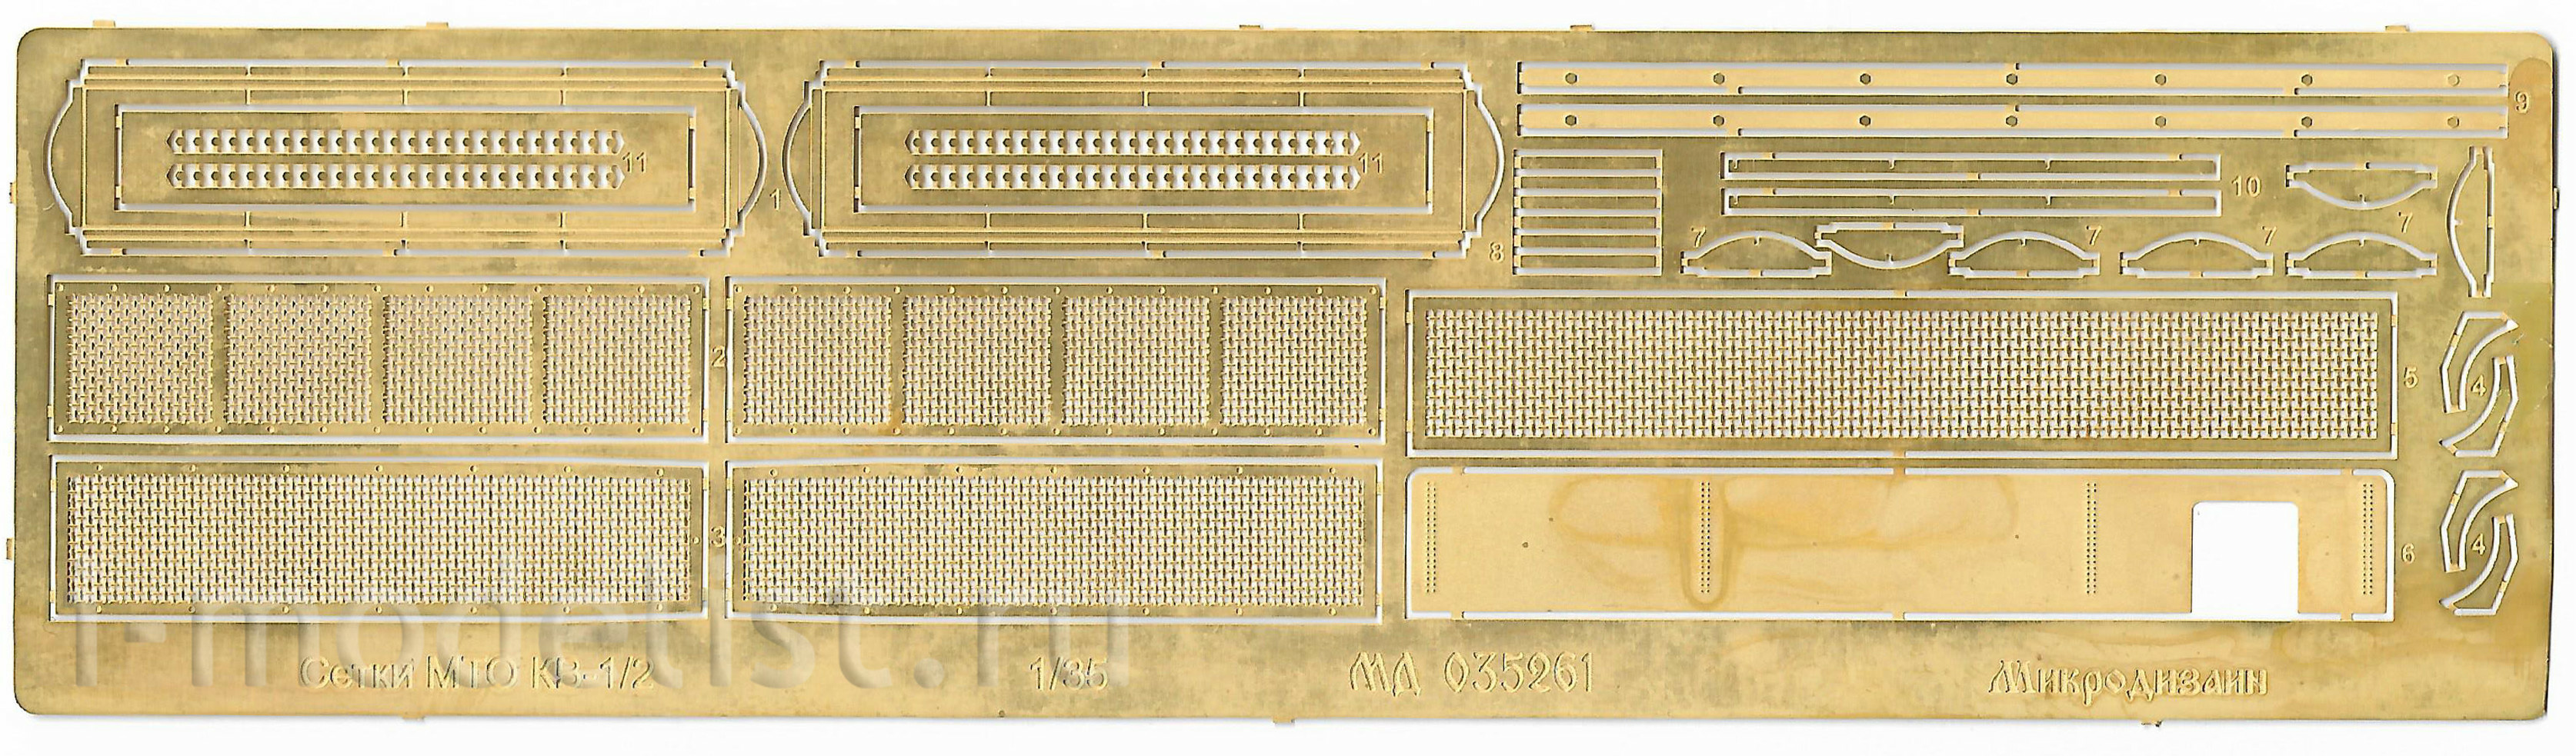 035262 Microdesign 1/35 photo-etched for the KV-1 Basic set